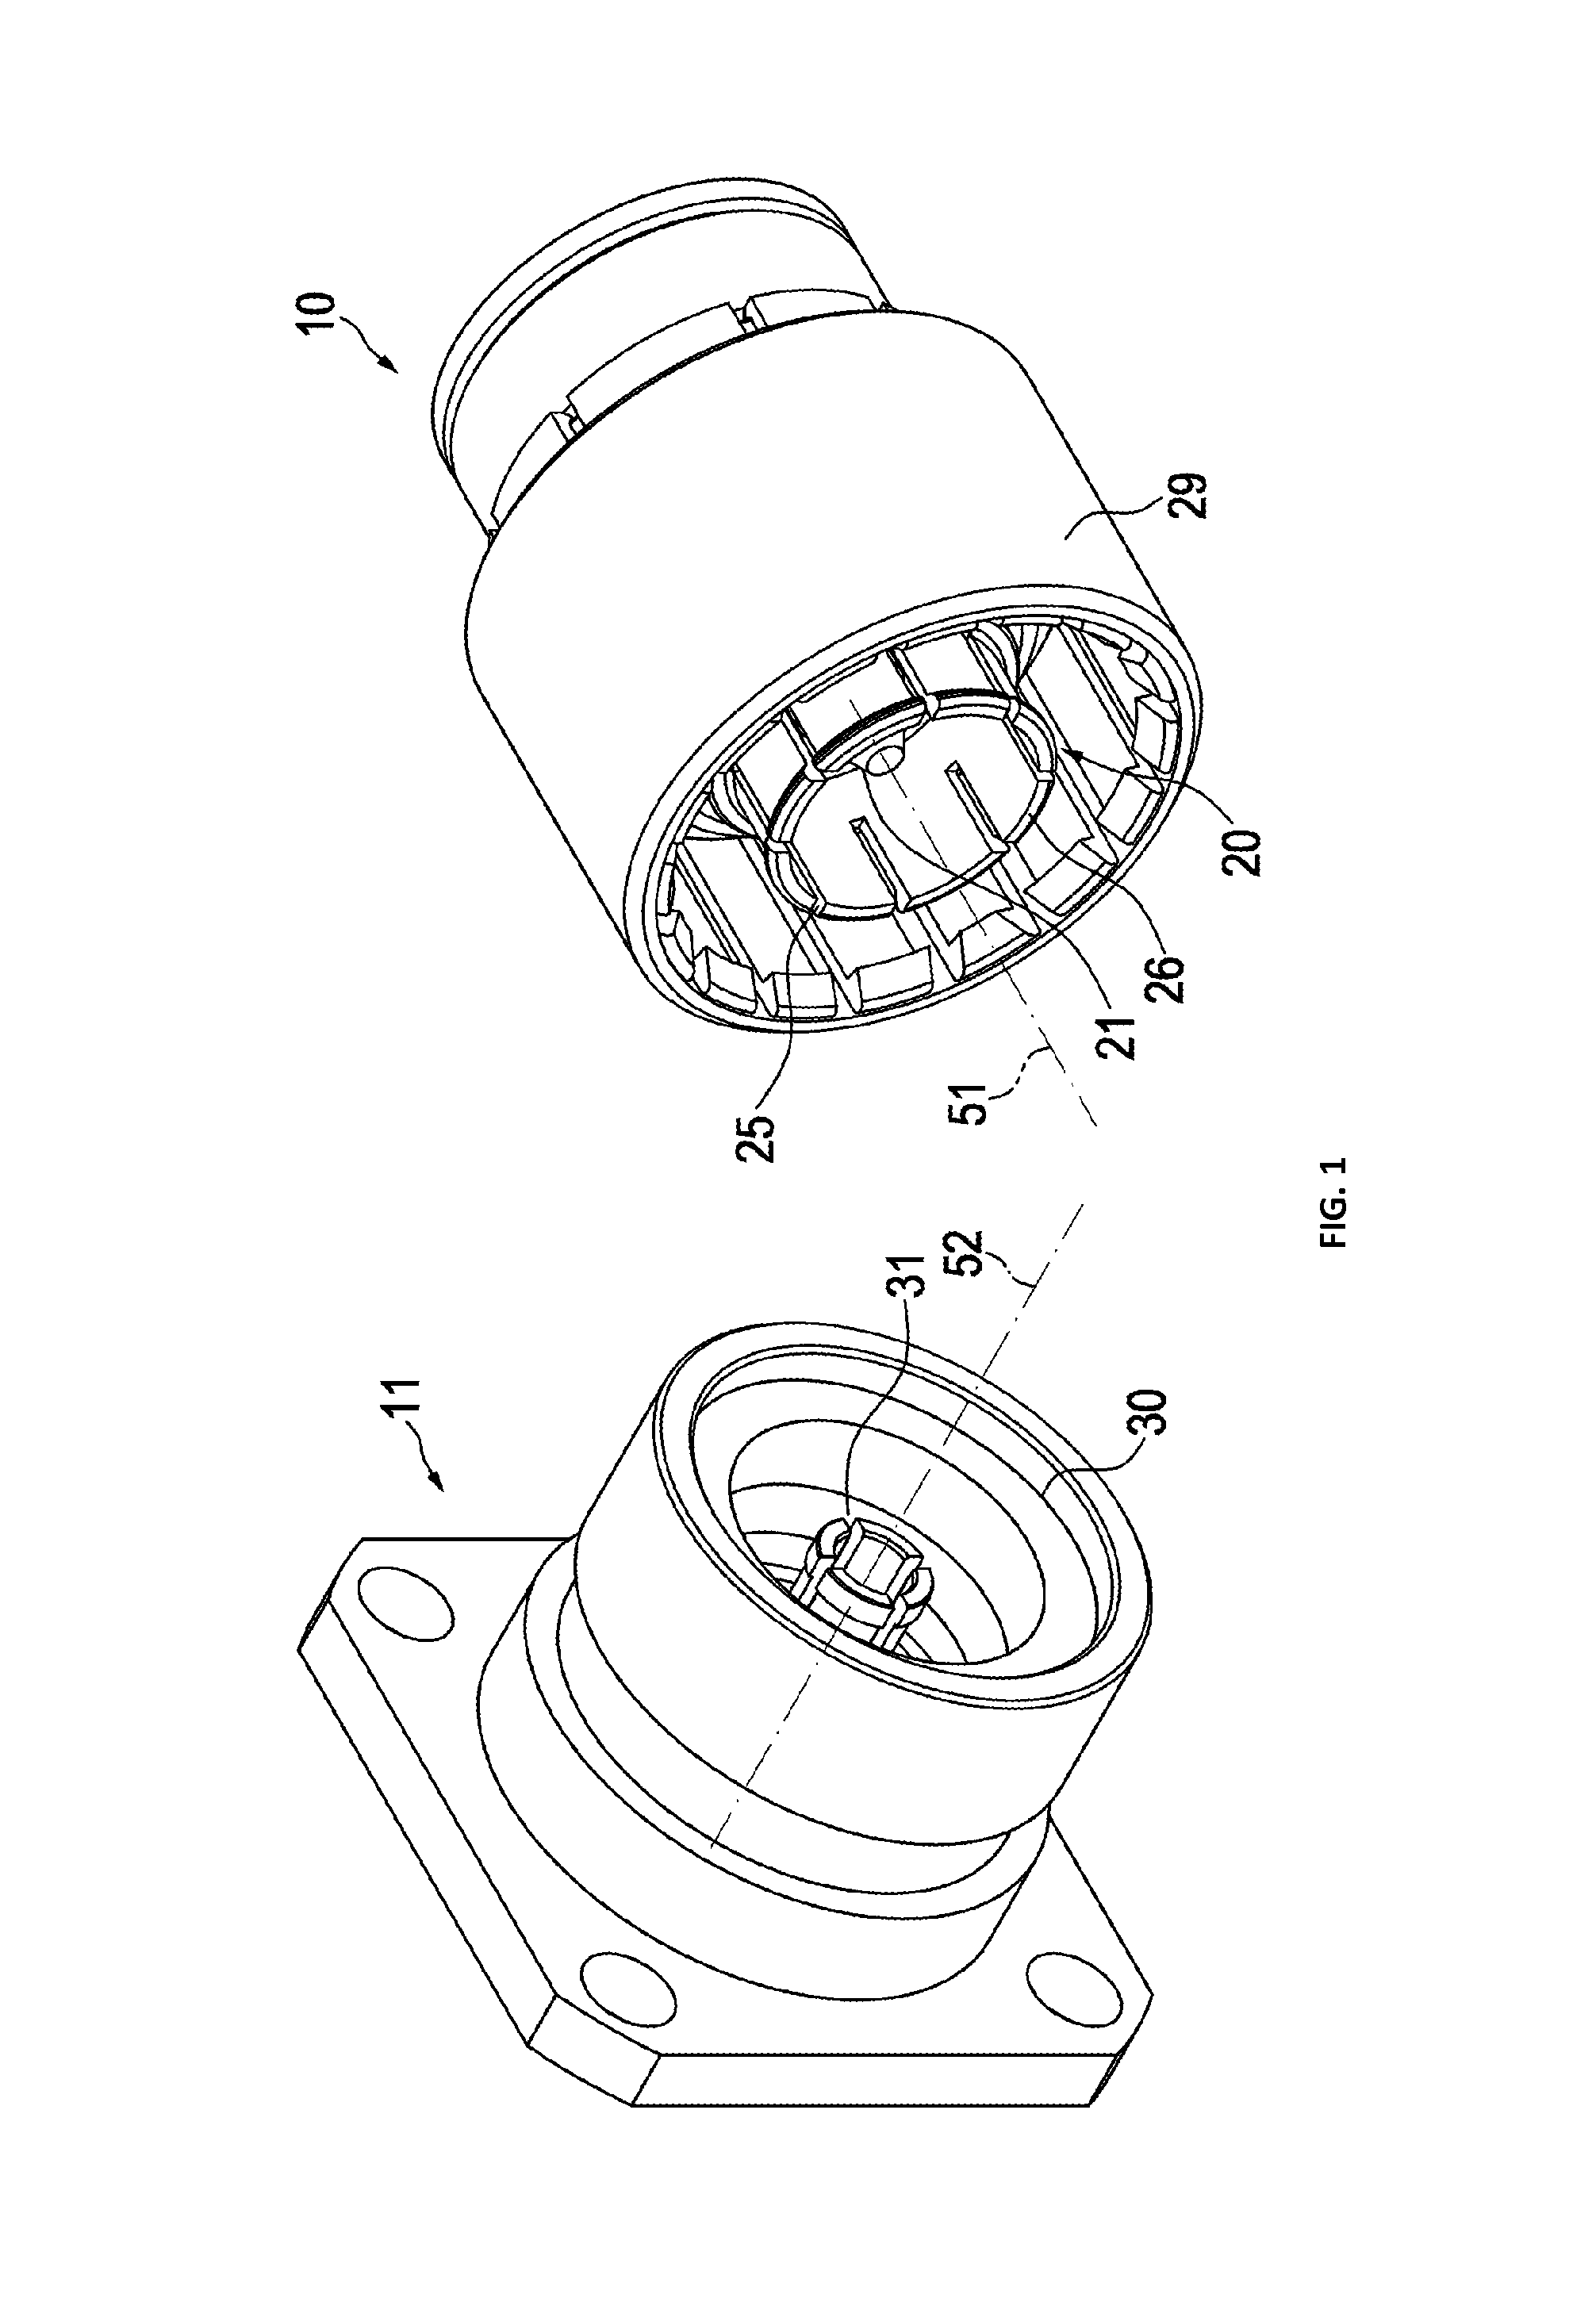 Coaxial, plug and socket connectors with precision centering means